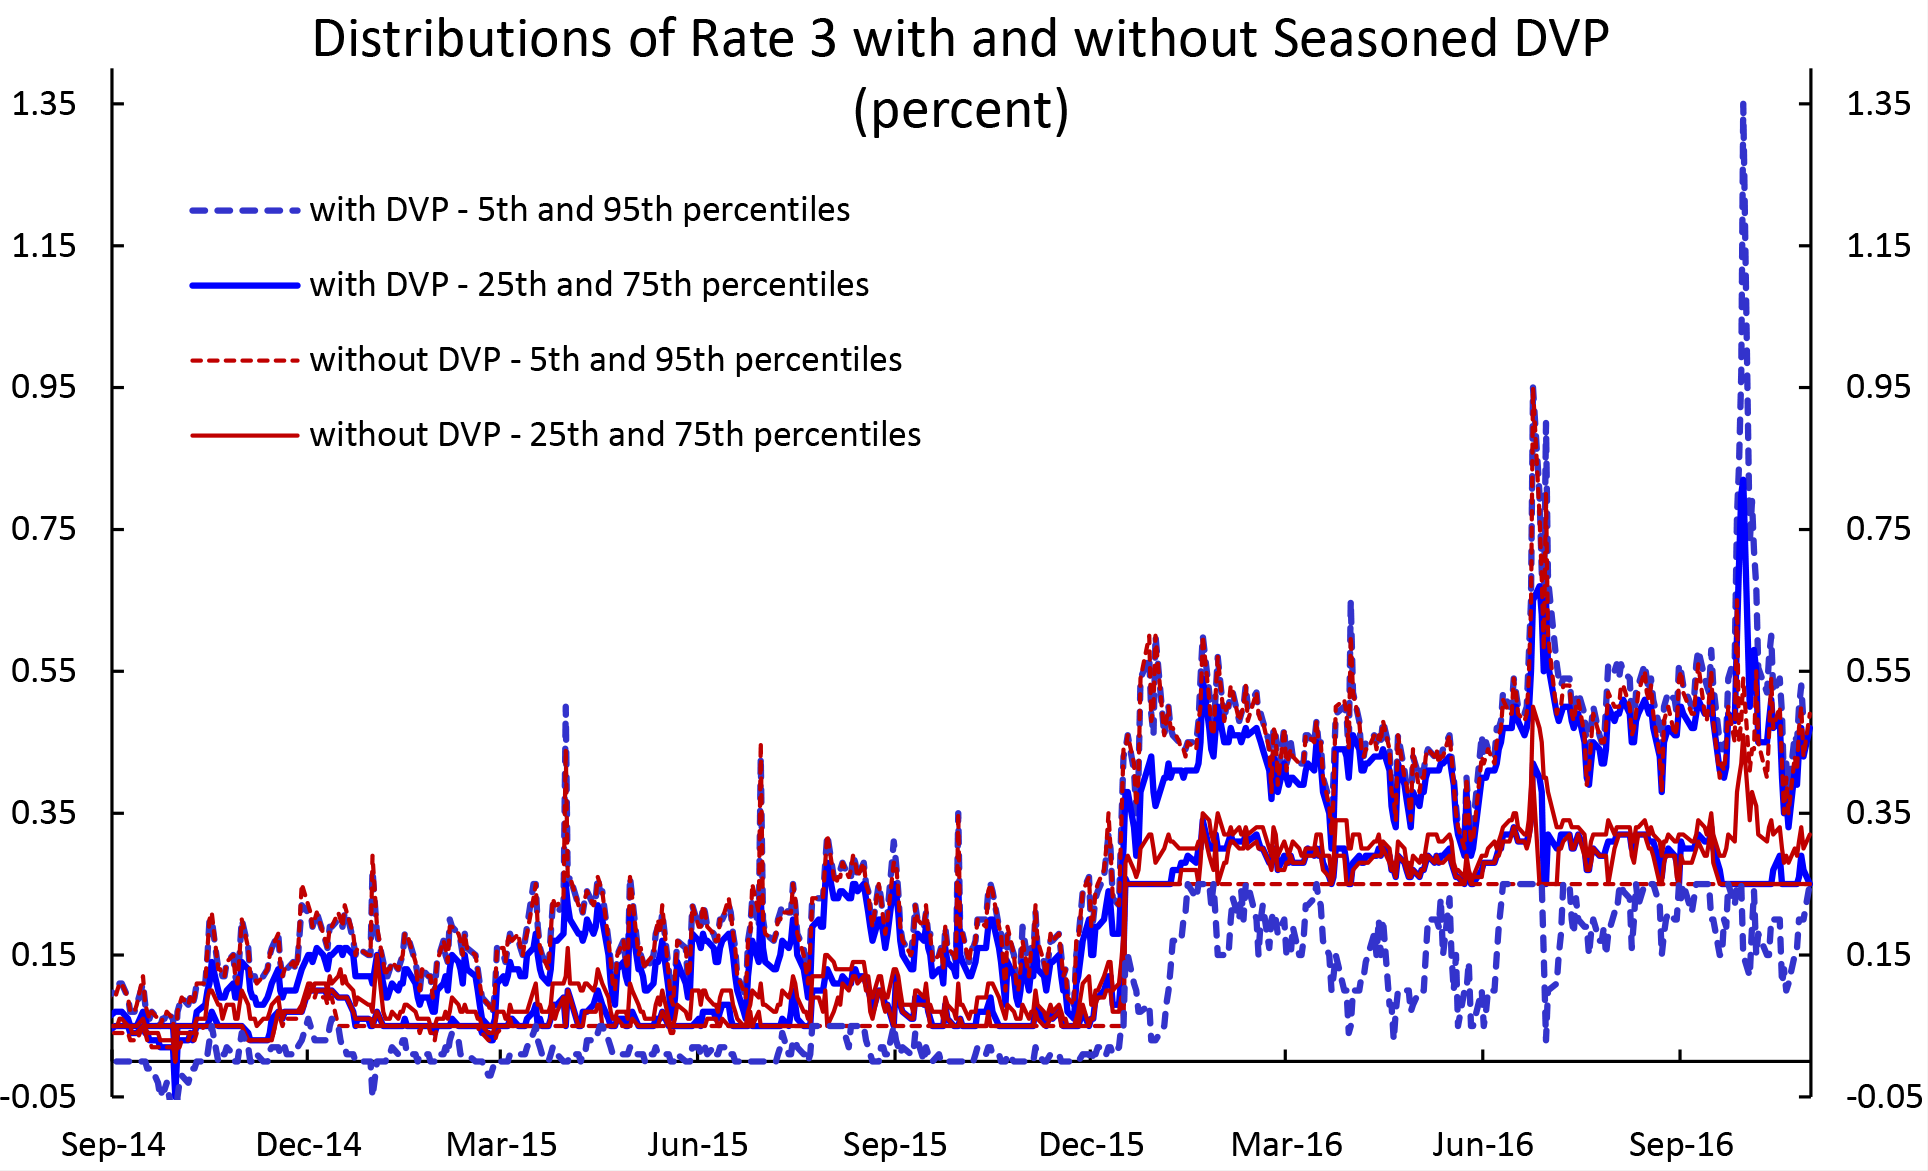 Figure 7: Distributions of Rate 3 with and without Seasoned DVP. See accessible link for data description.